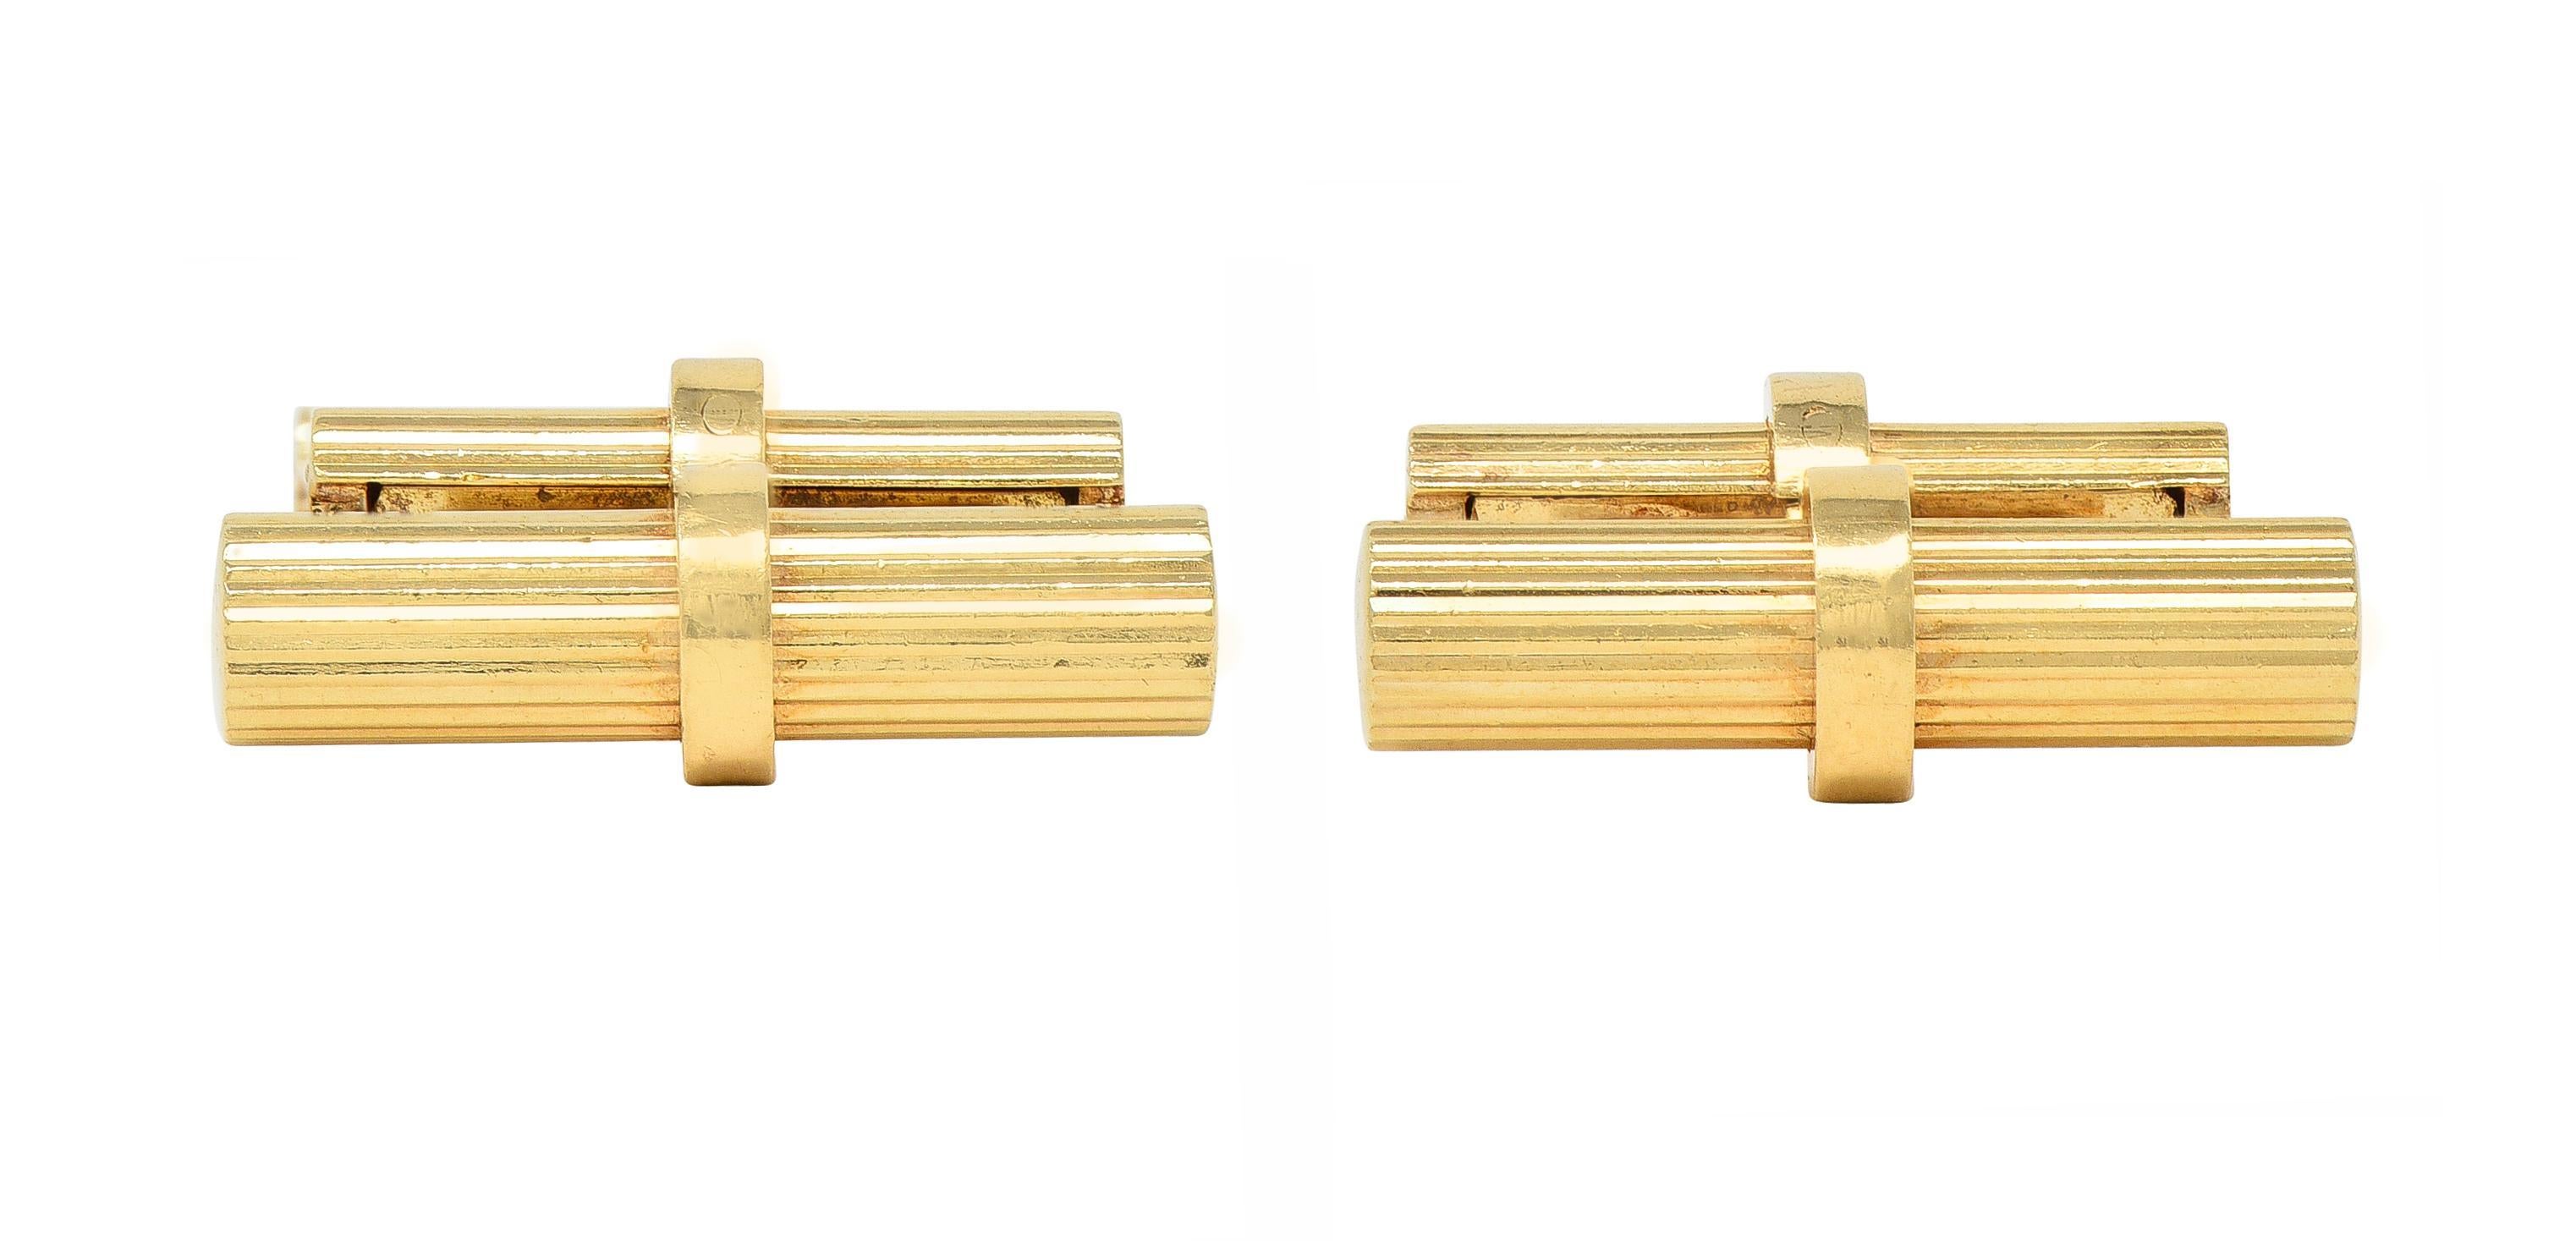 Bar-style cufflinks feature hinged barrel terminals 
One large and one small - fluted fully around 
With high polish finish 
Stamped for 14 karat gold
Fully signed for Tiffany & Co. 
Circa: 1960s
Small terminal measures: 3/16 x 13/16 inch
Large